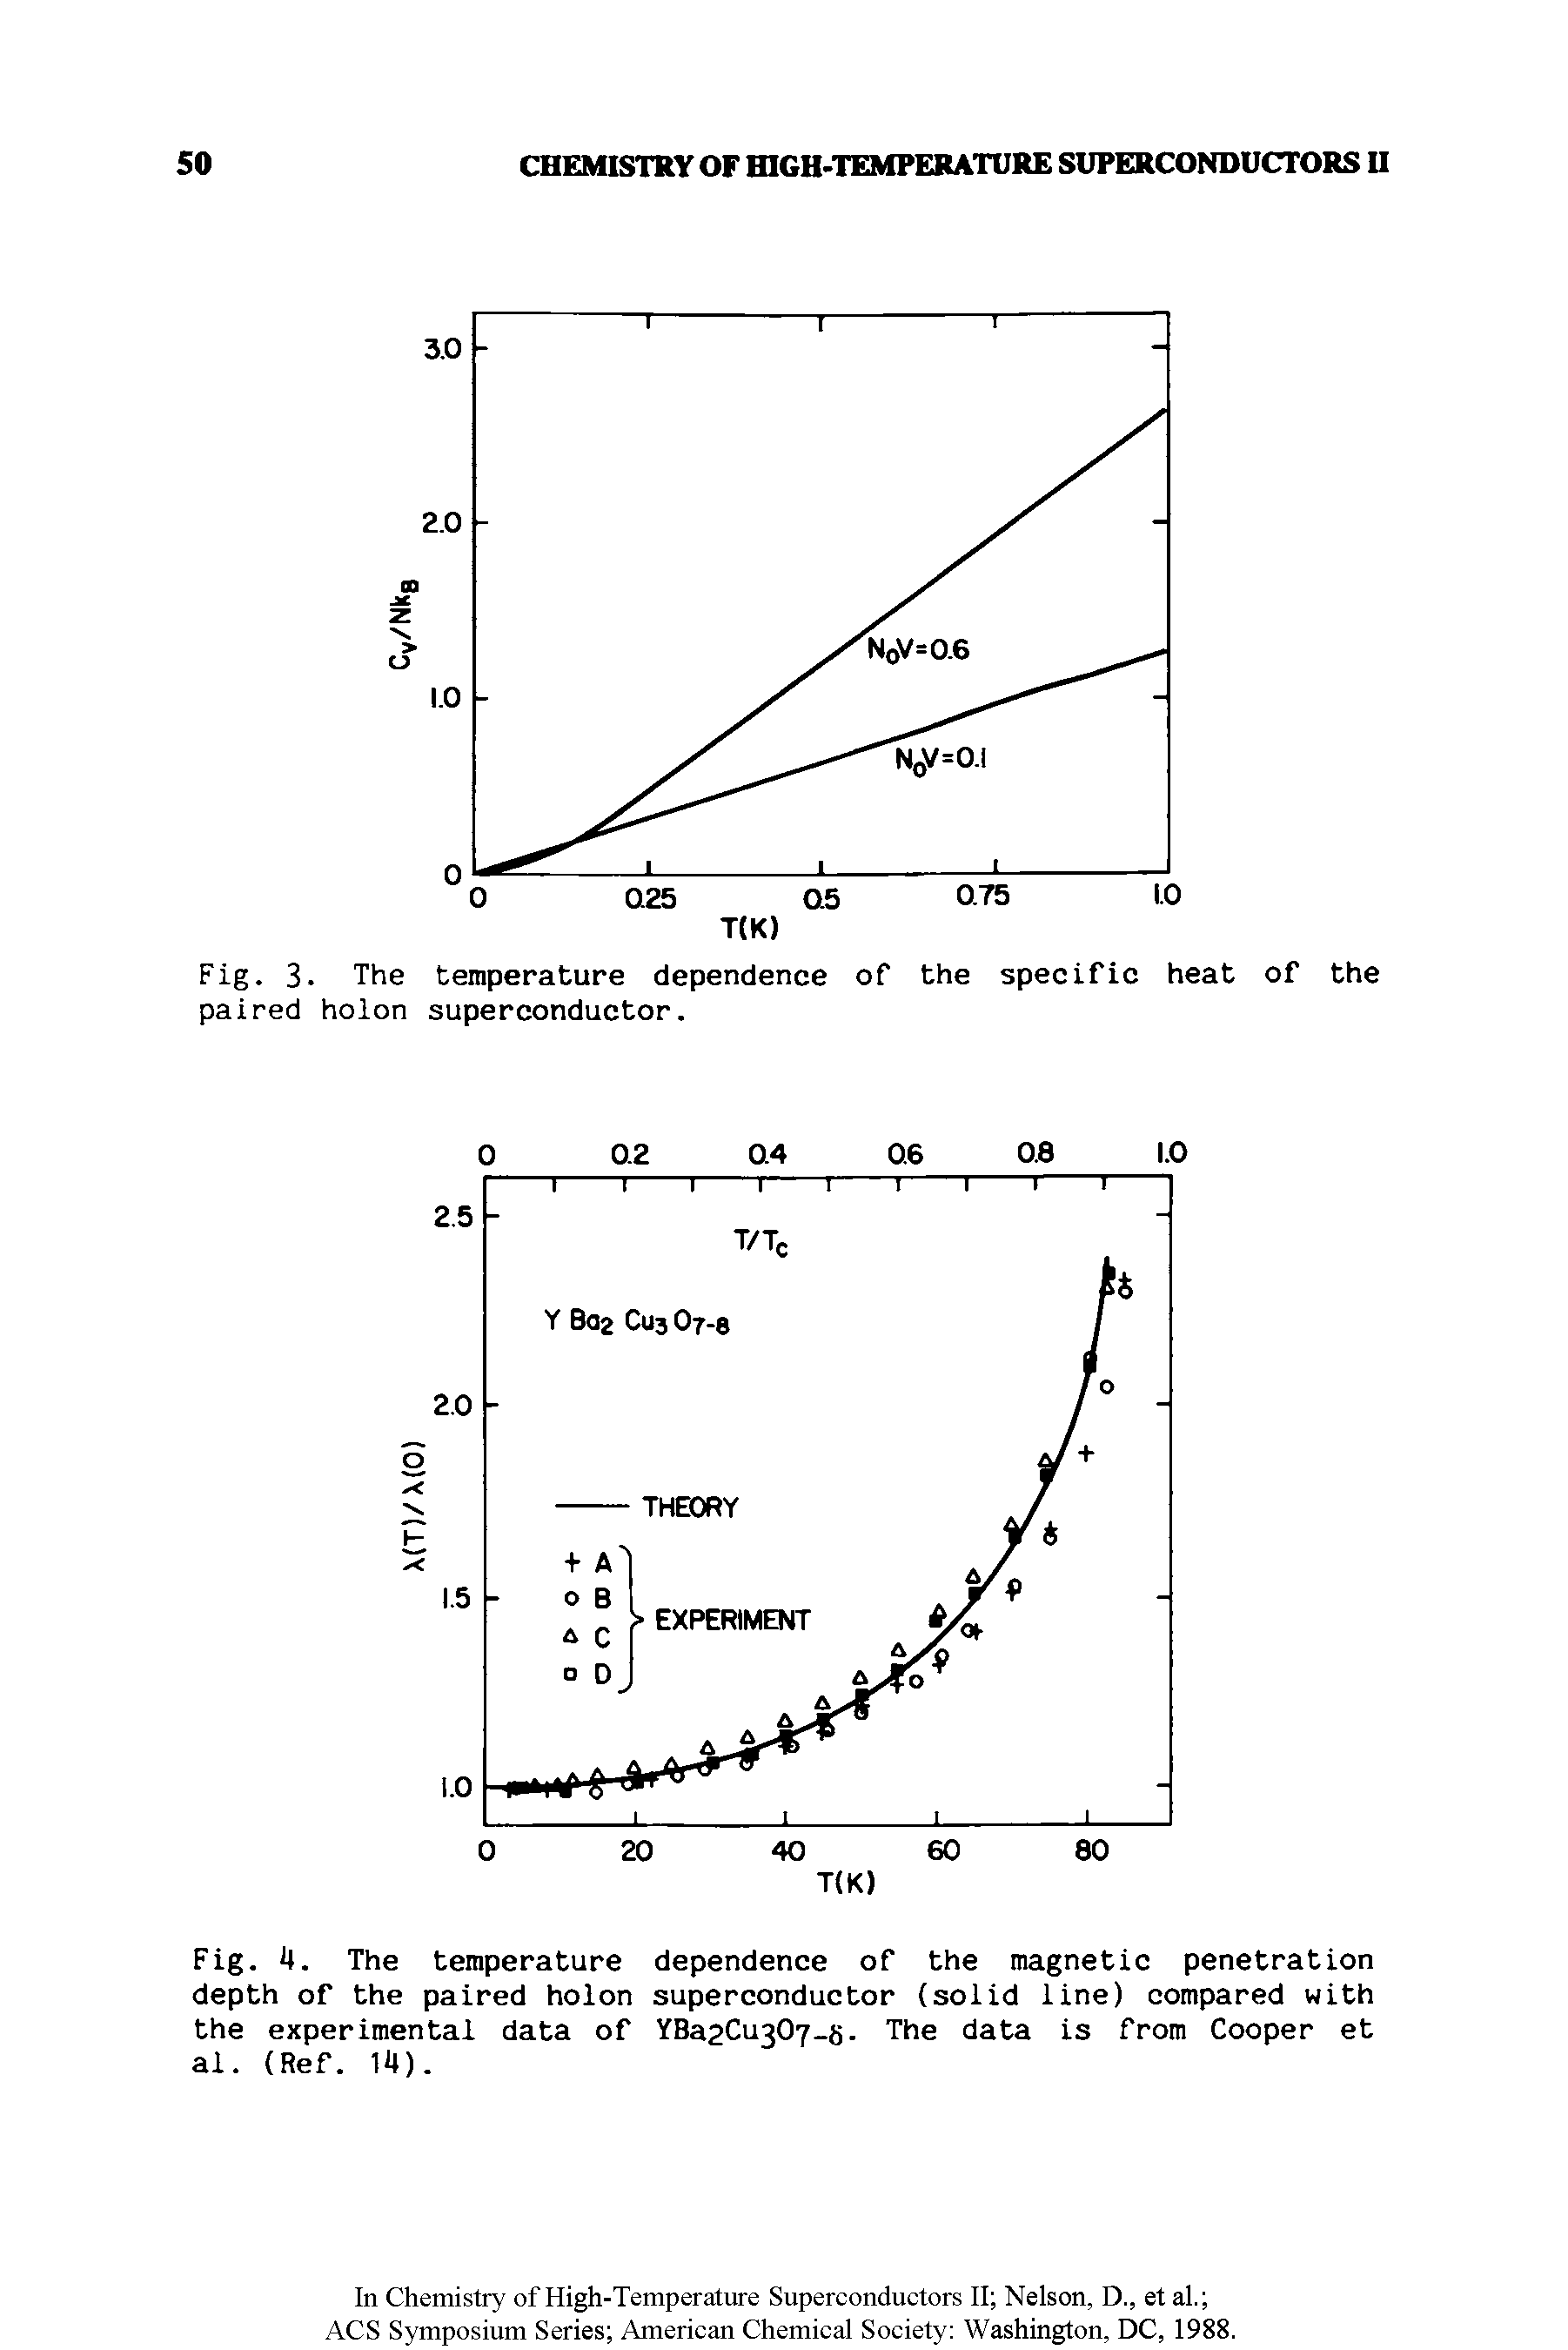 Fig. 3. The temperature dependence of the specific heat of the paired holon superconductor.